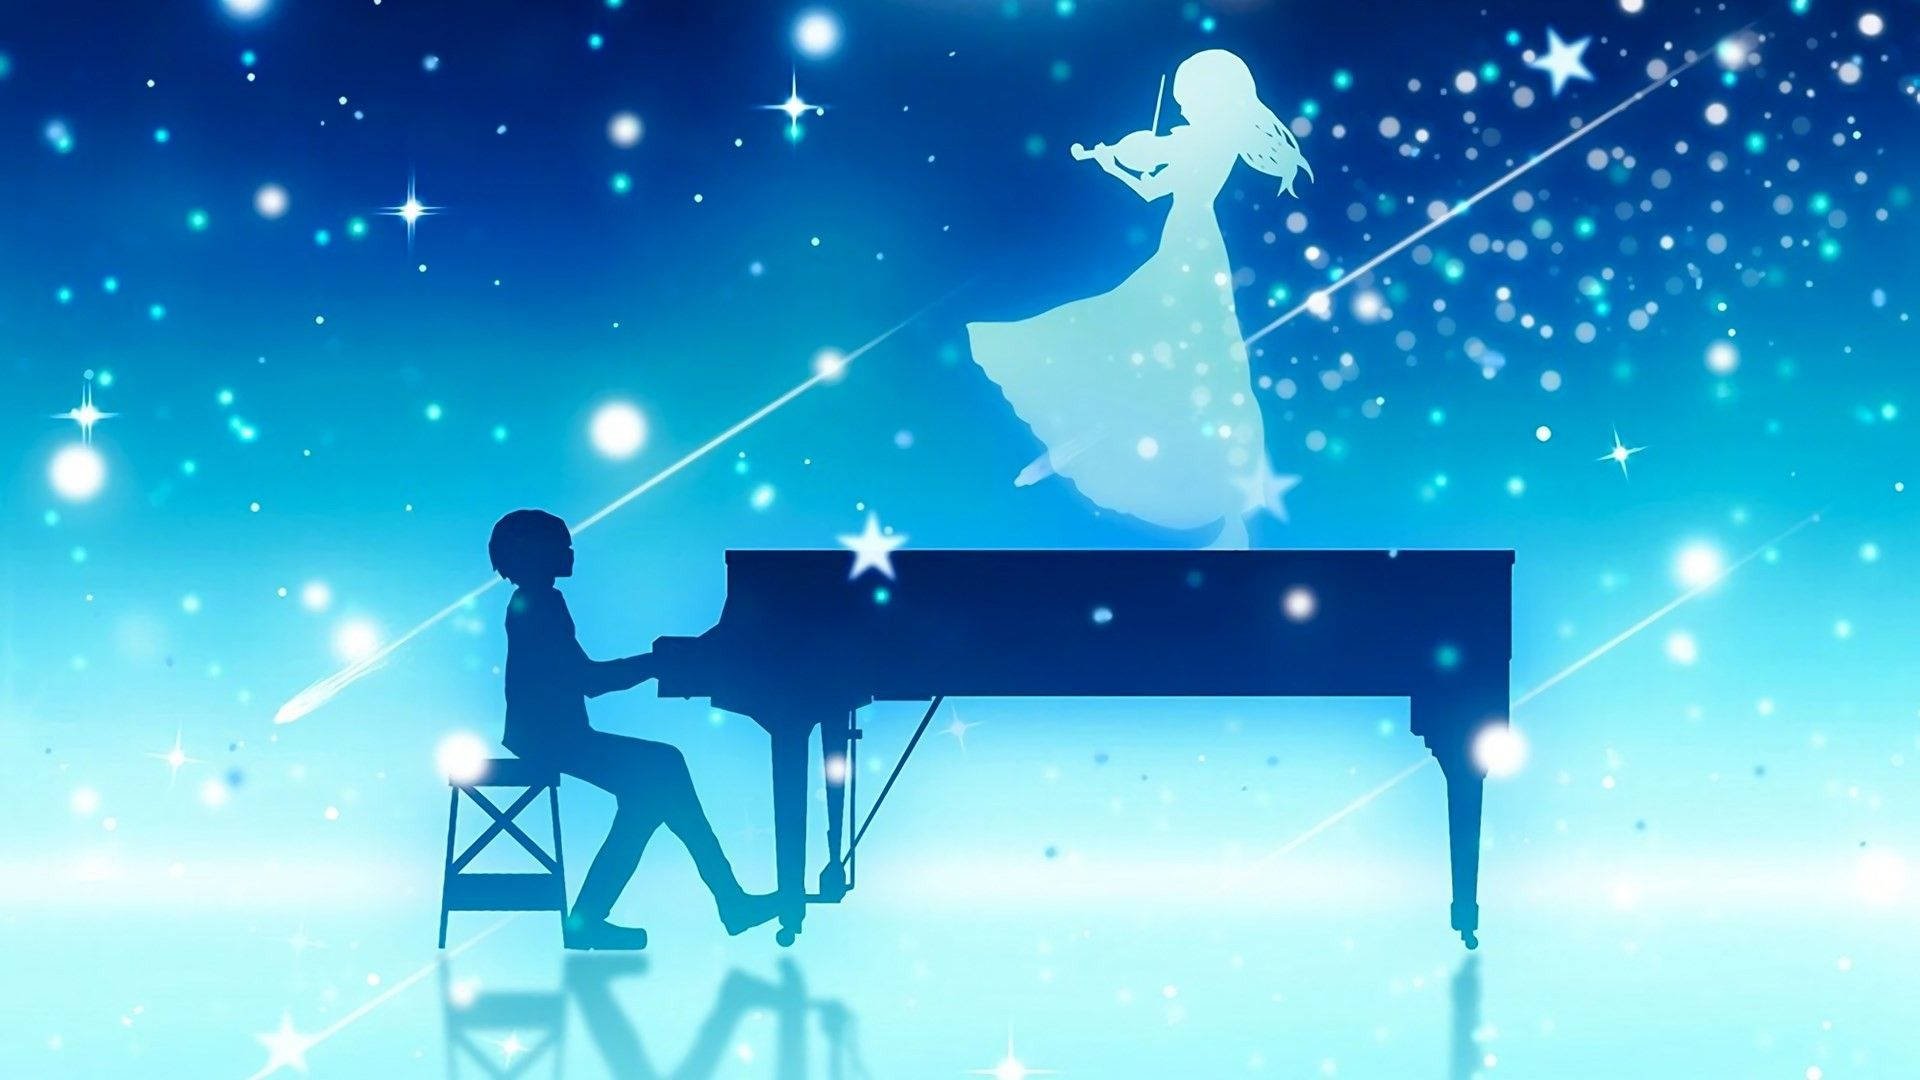 Blue Aesthetic Your Lie In April Background